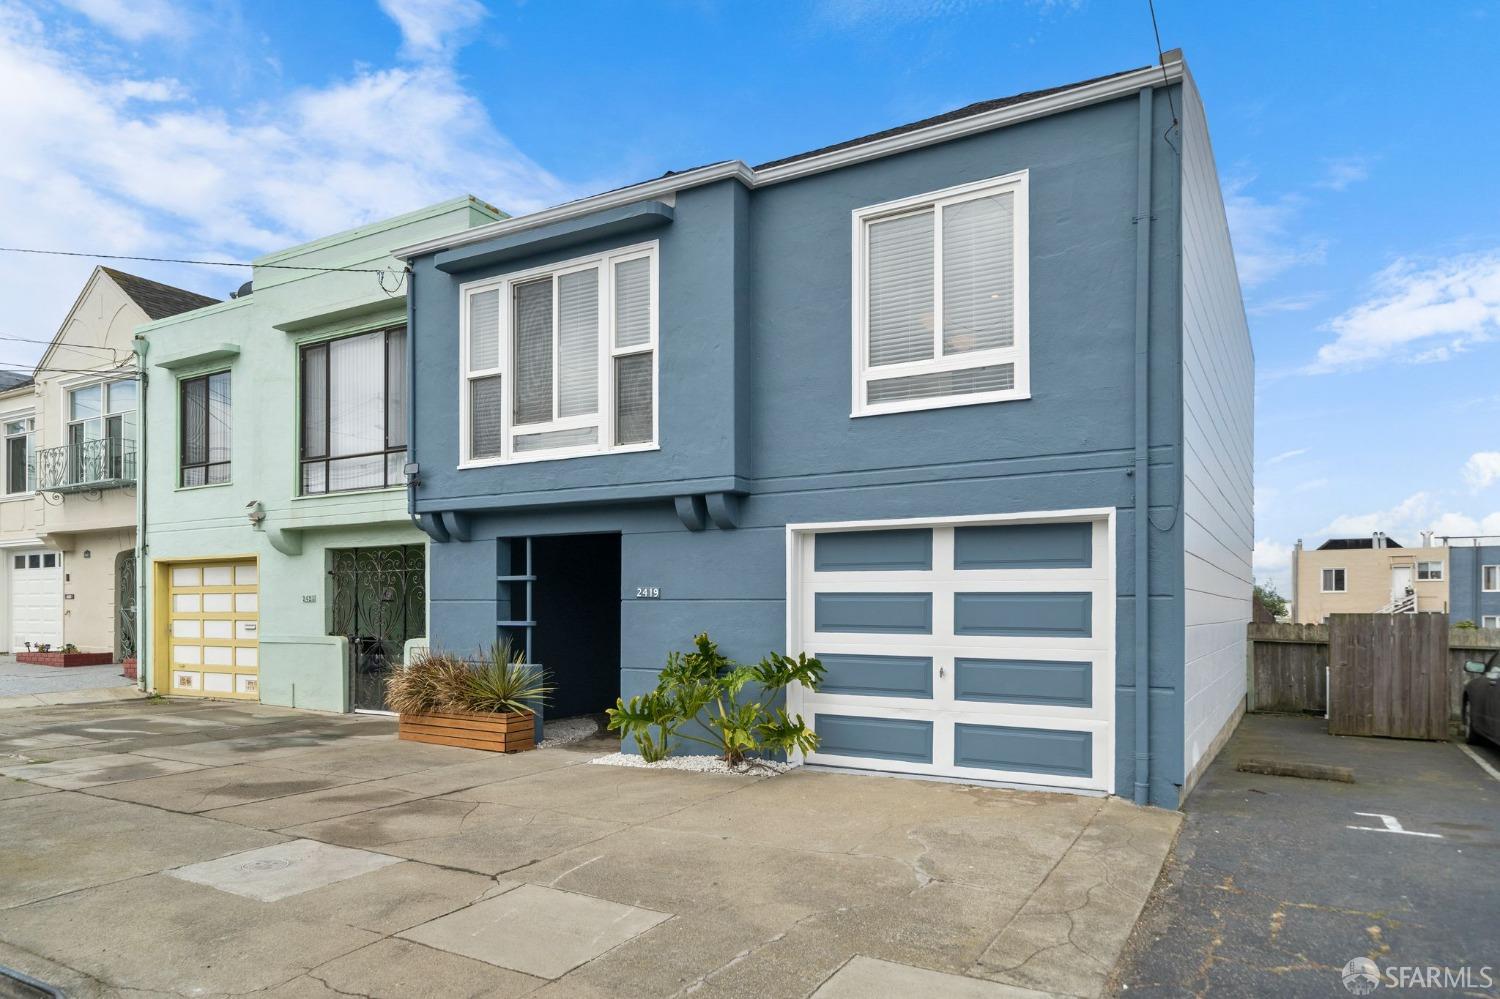 Photo of 2419 42nd Ave in San Francisco, CA